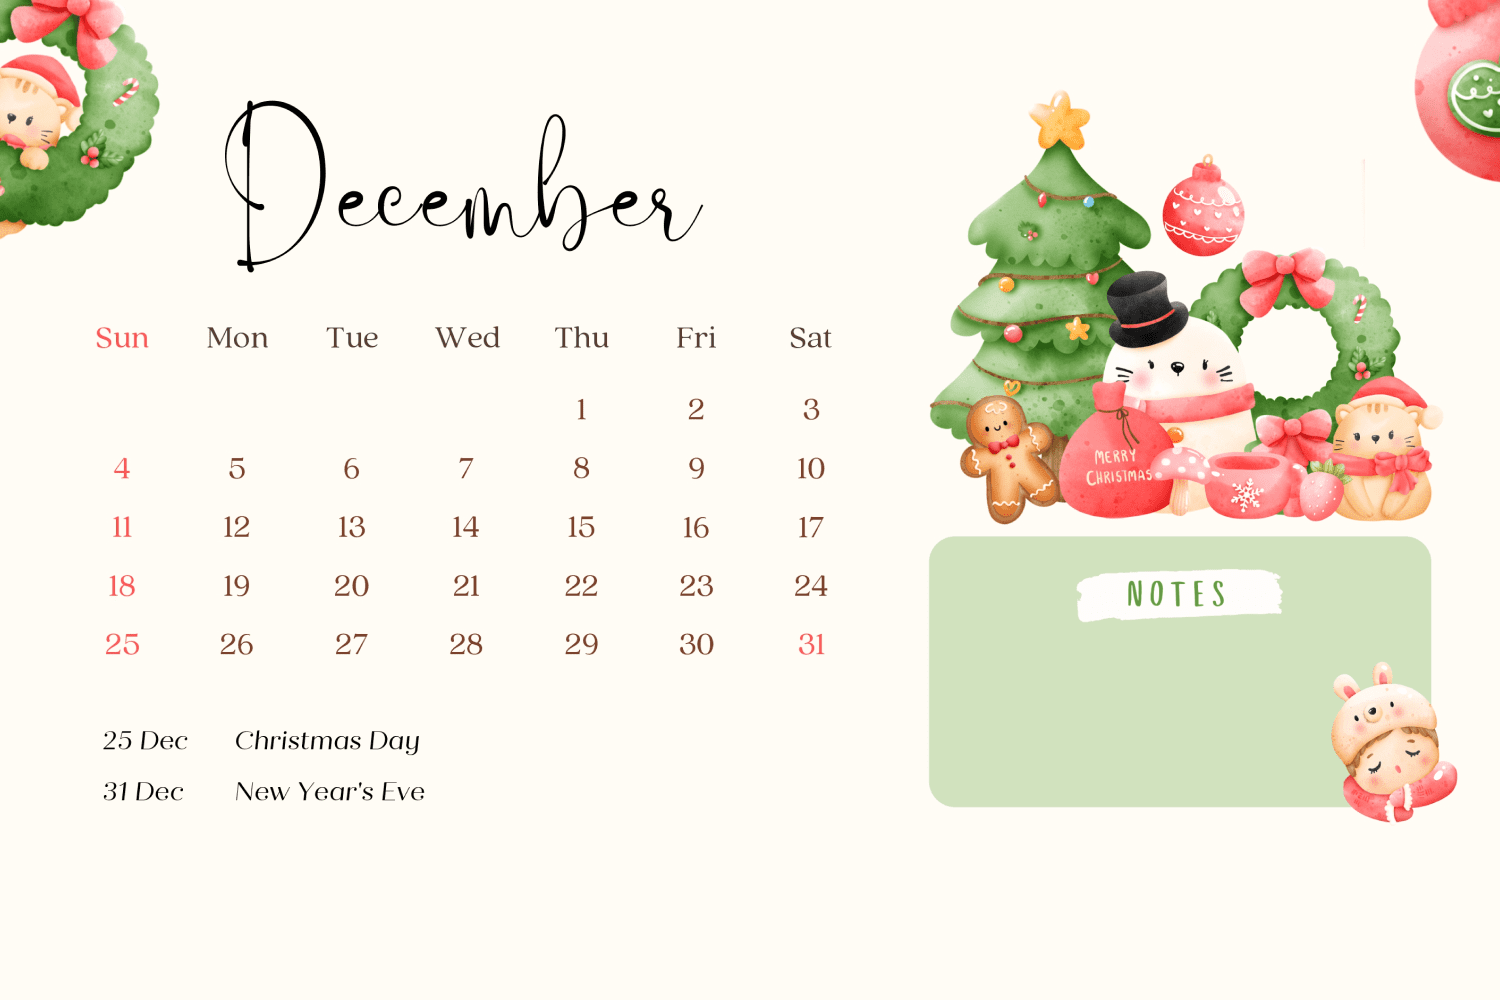 December calendar with space for notes and cute christmas elements.